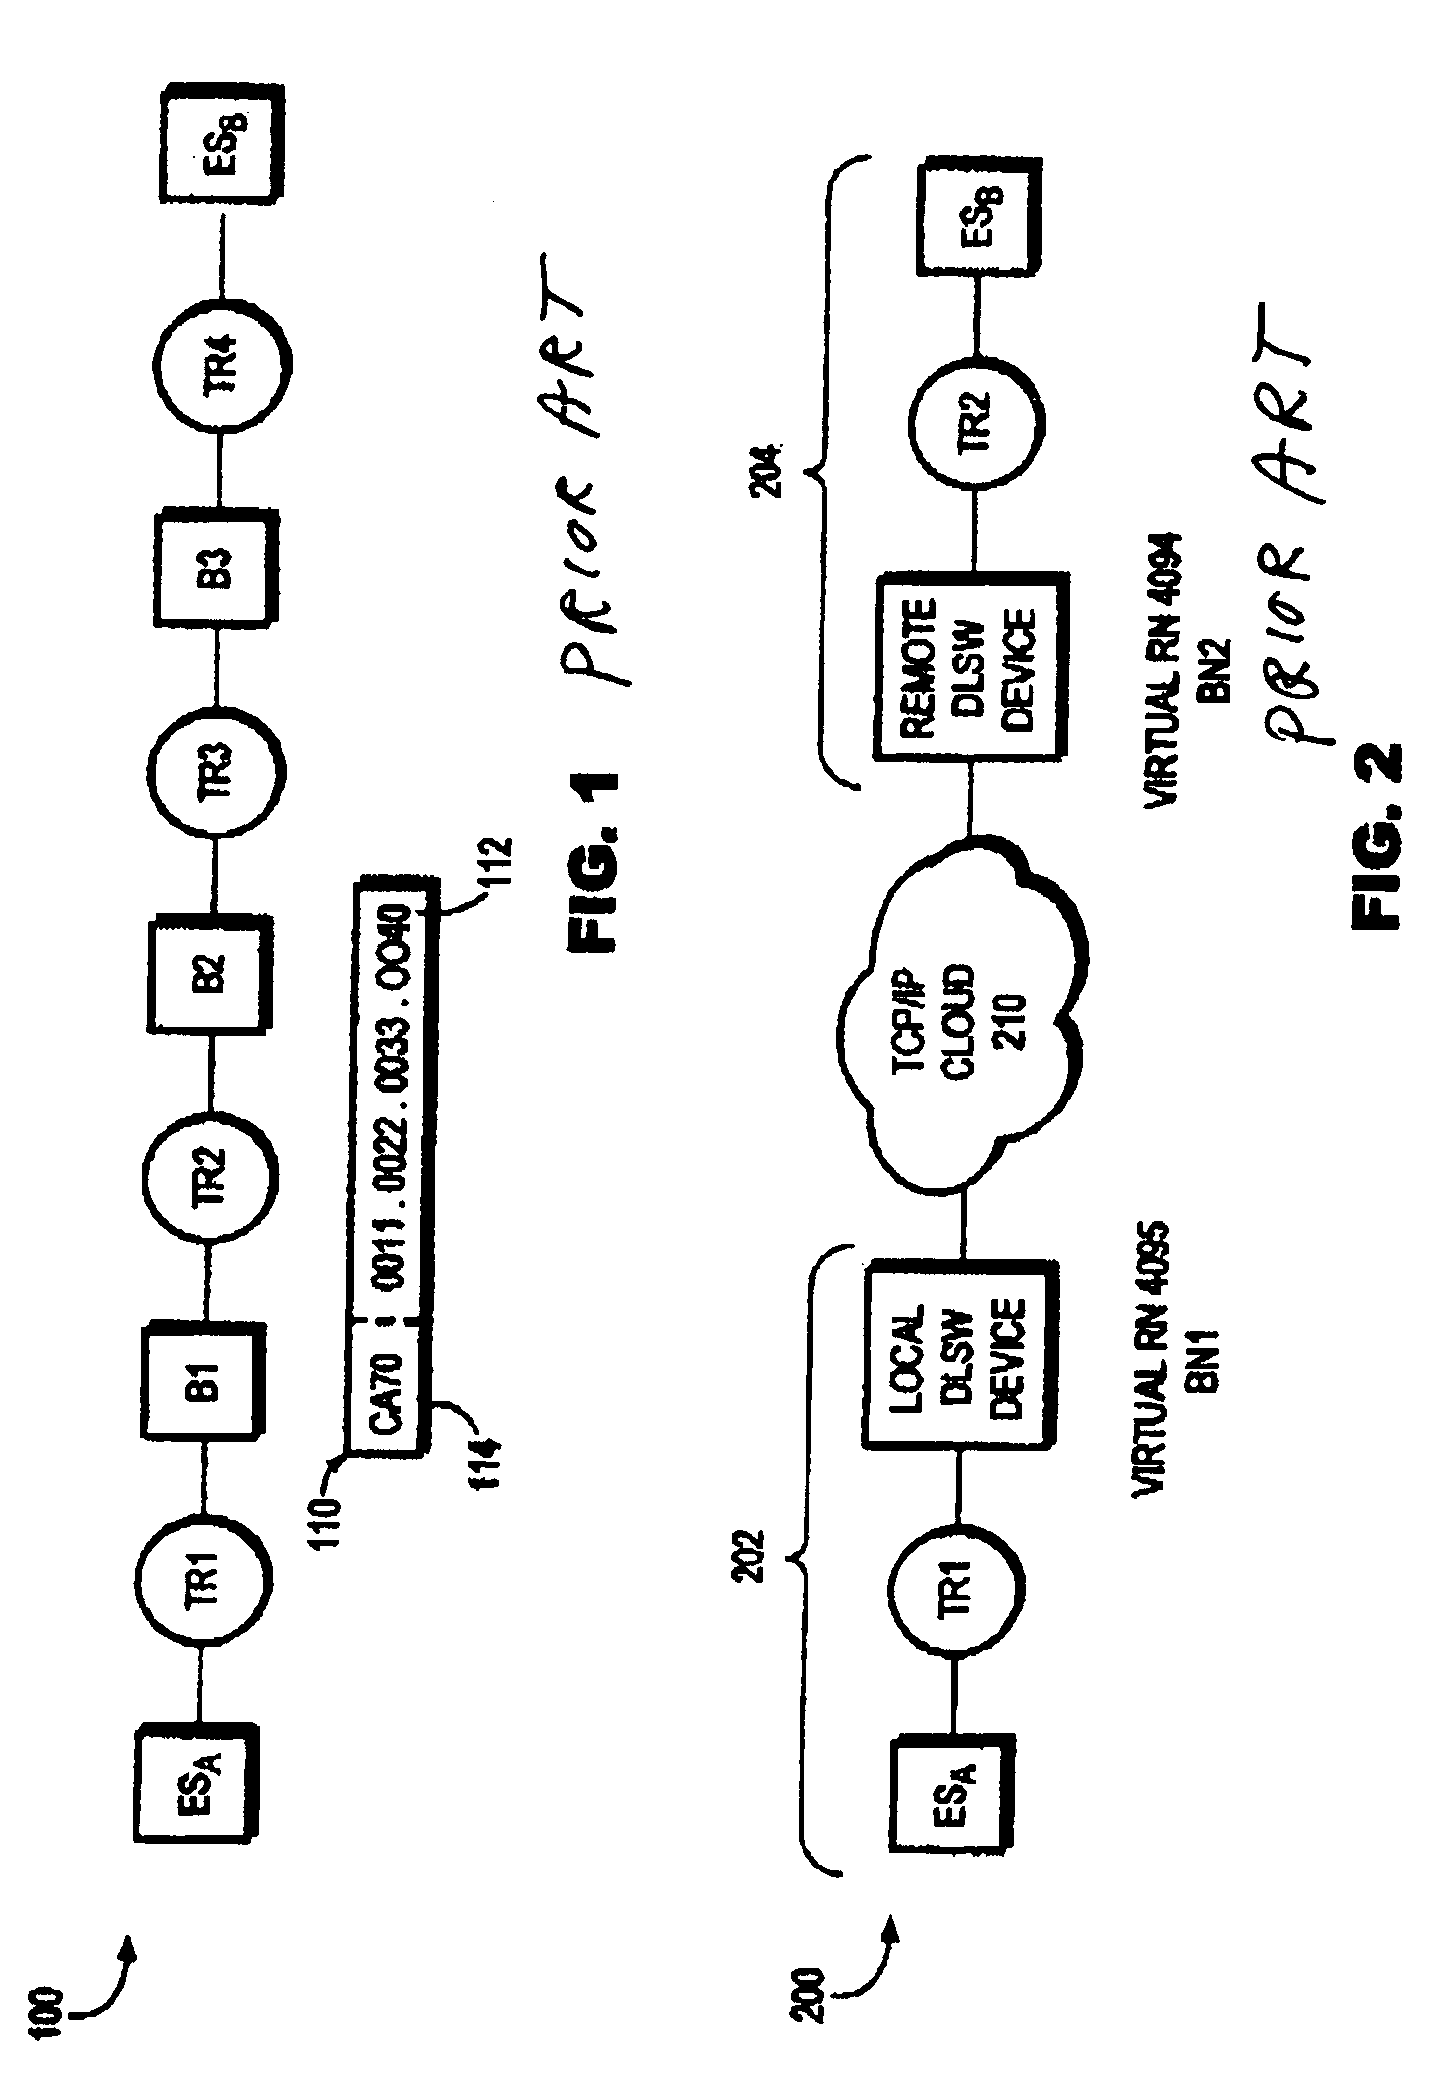 DLSw RIF passthru technique for providing end-to-end source route information to end stations of a data link switching network